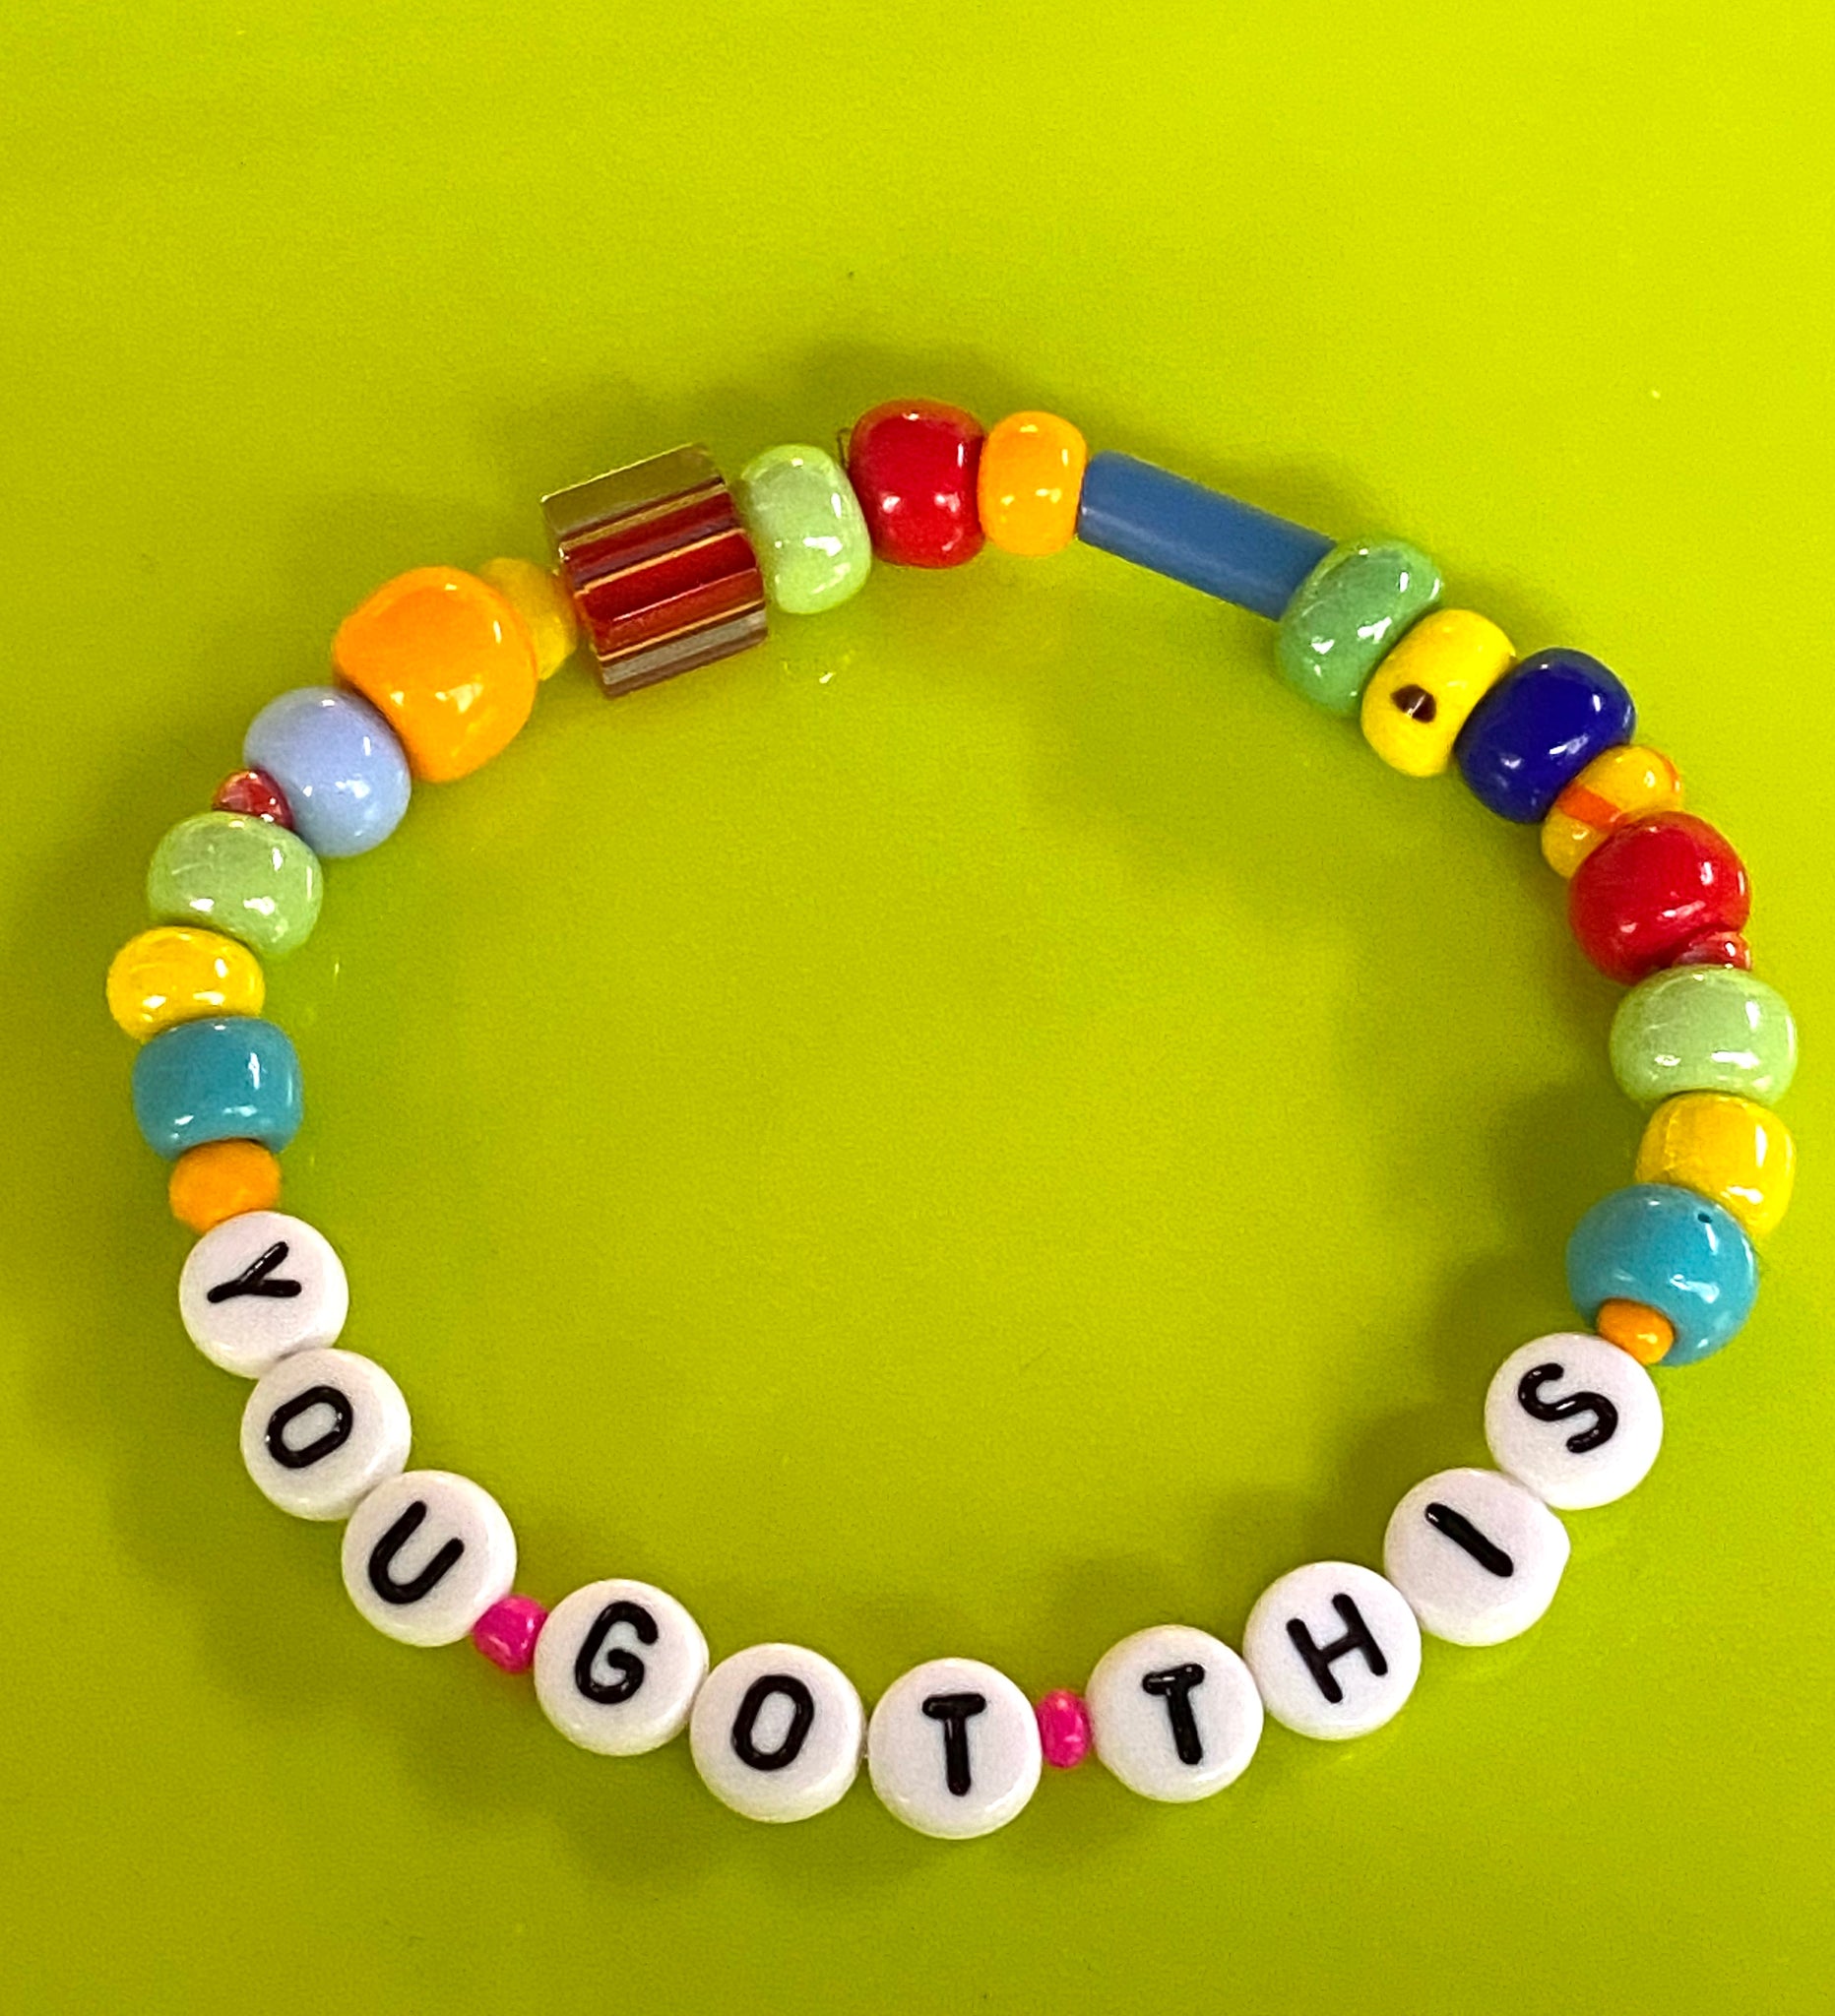 Just Say It! Word Bracelet Kit: Larger funky mix – The Bead Shop